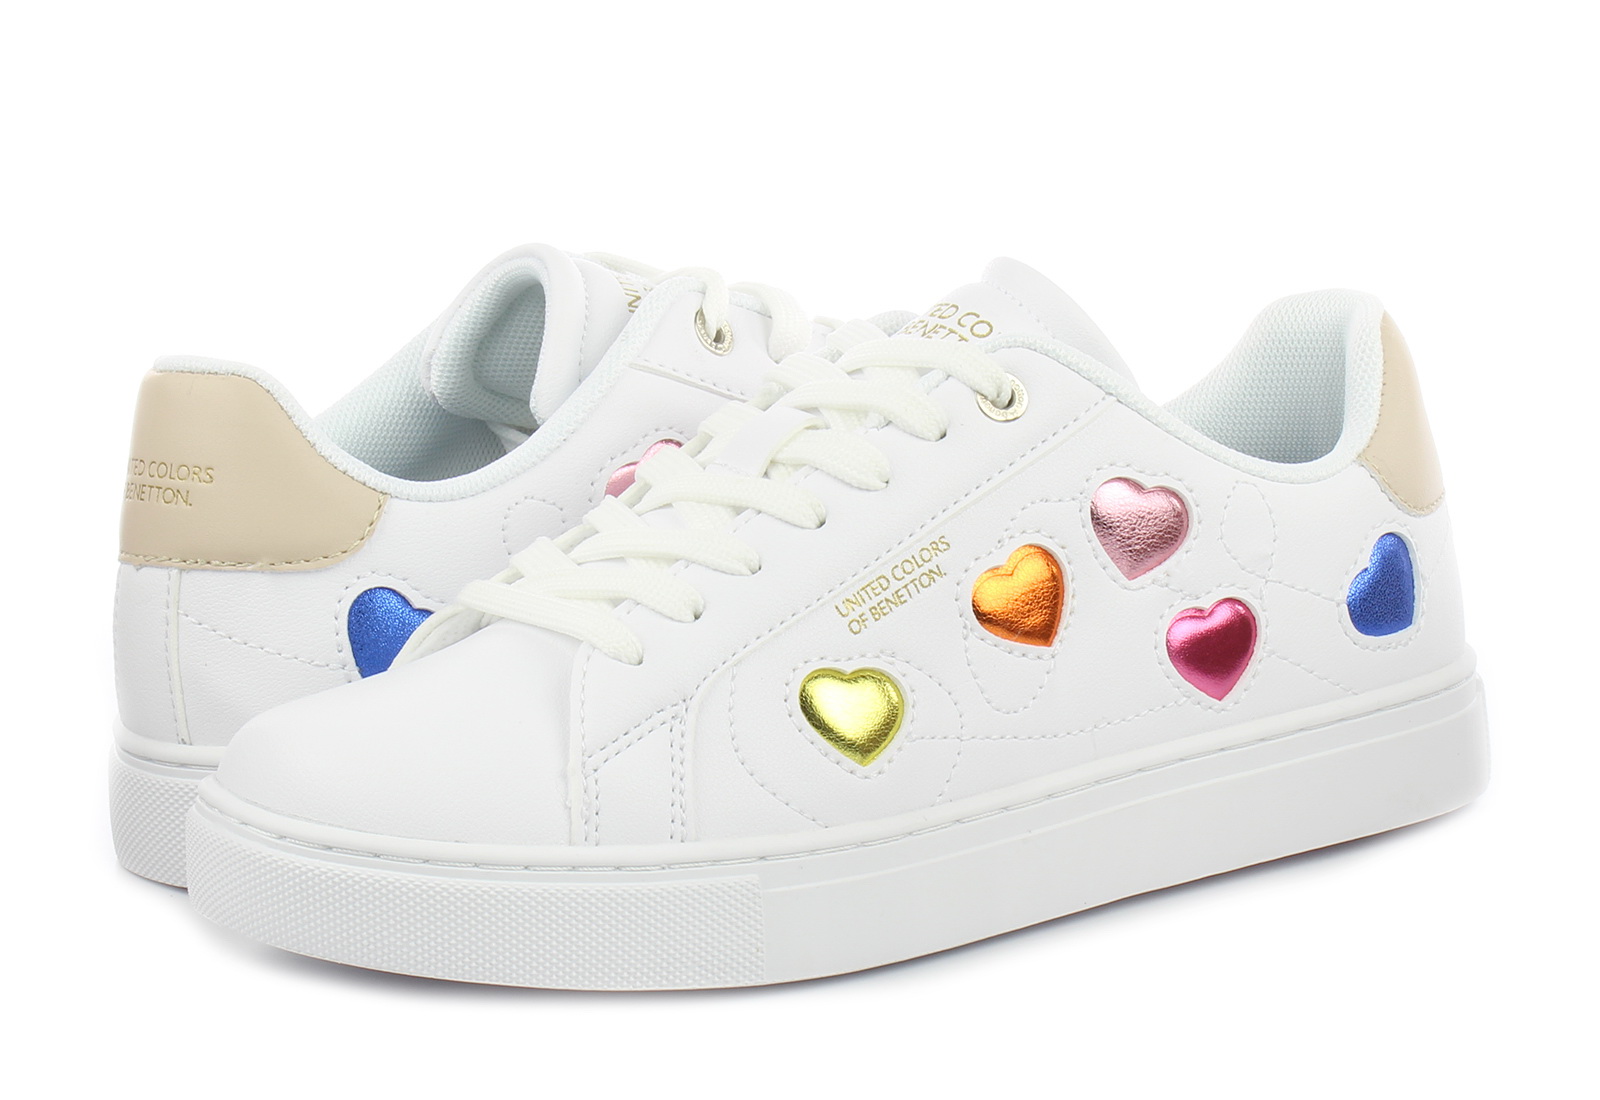 fragment bang het winkelcentrum Benetton Trainers - Love Multi Ltx - BTW114105-1000 - Online shop for  sneakers, shoes and boots